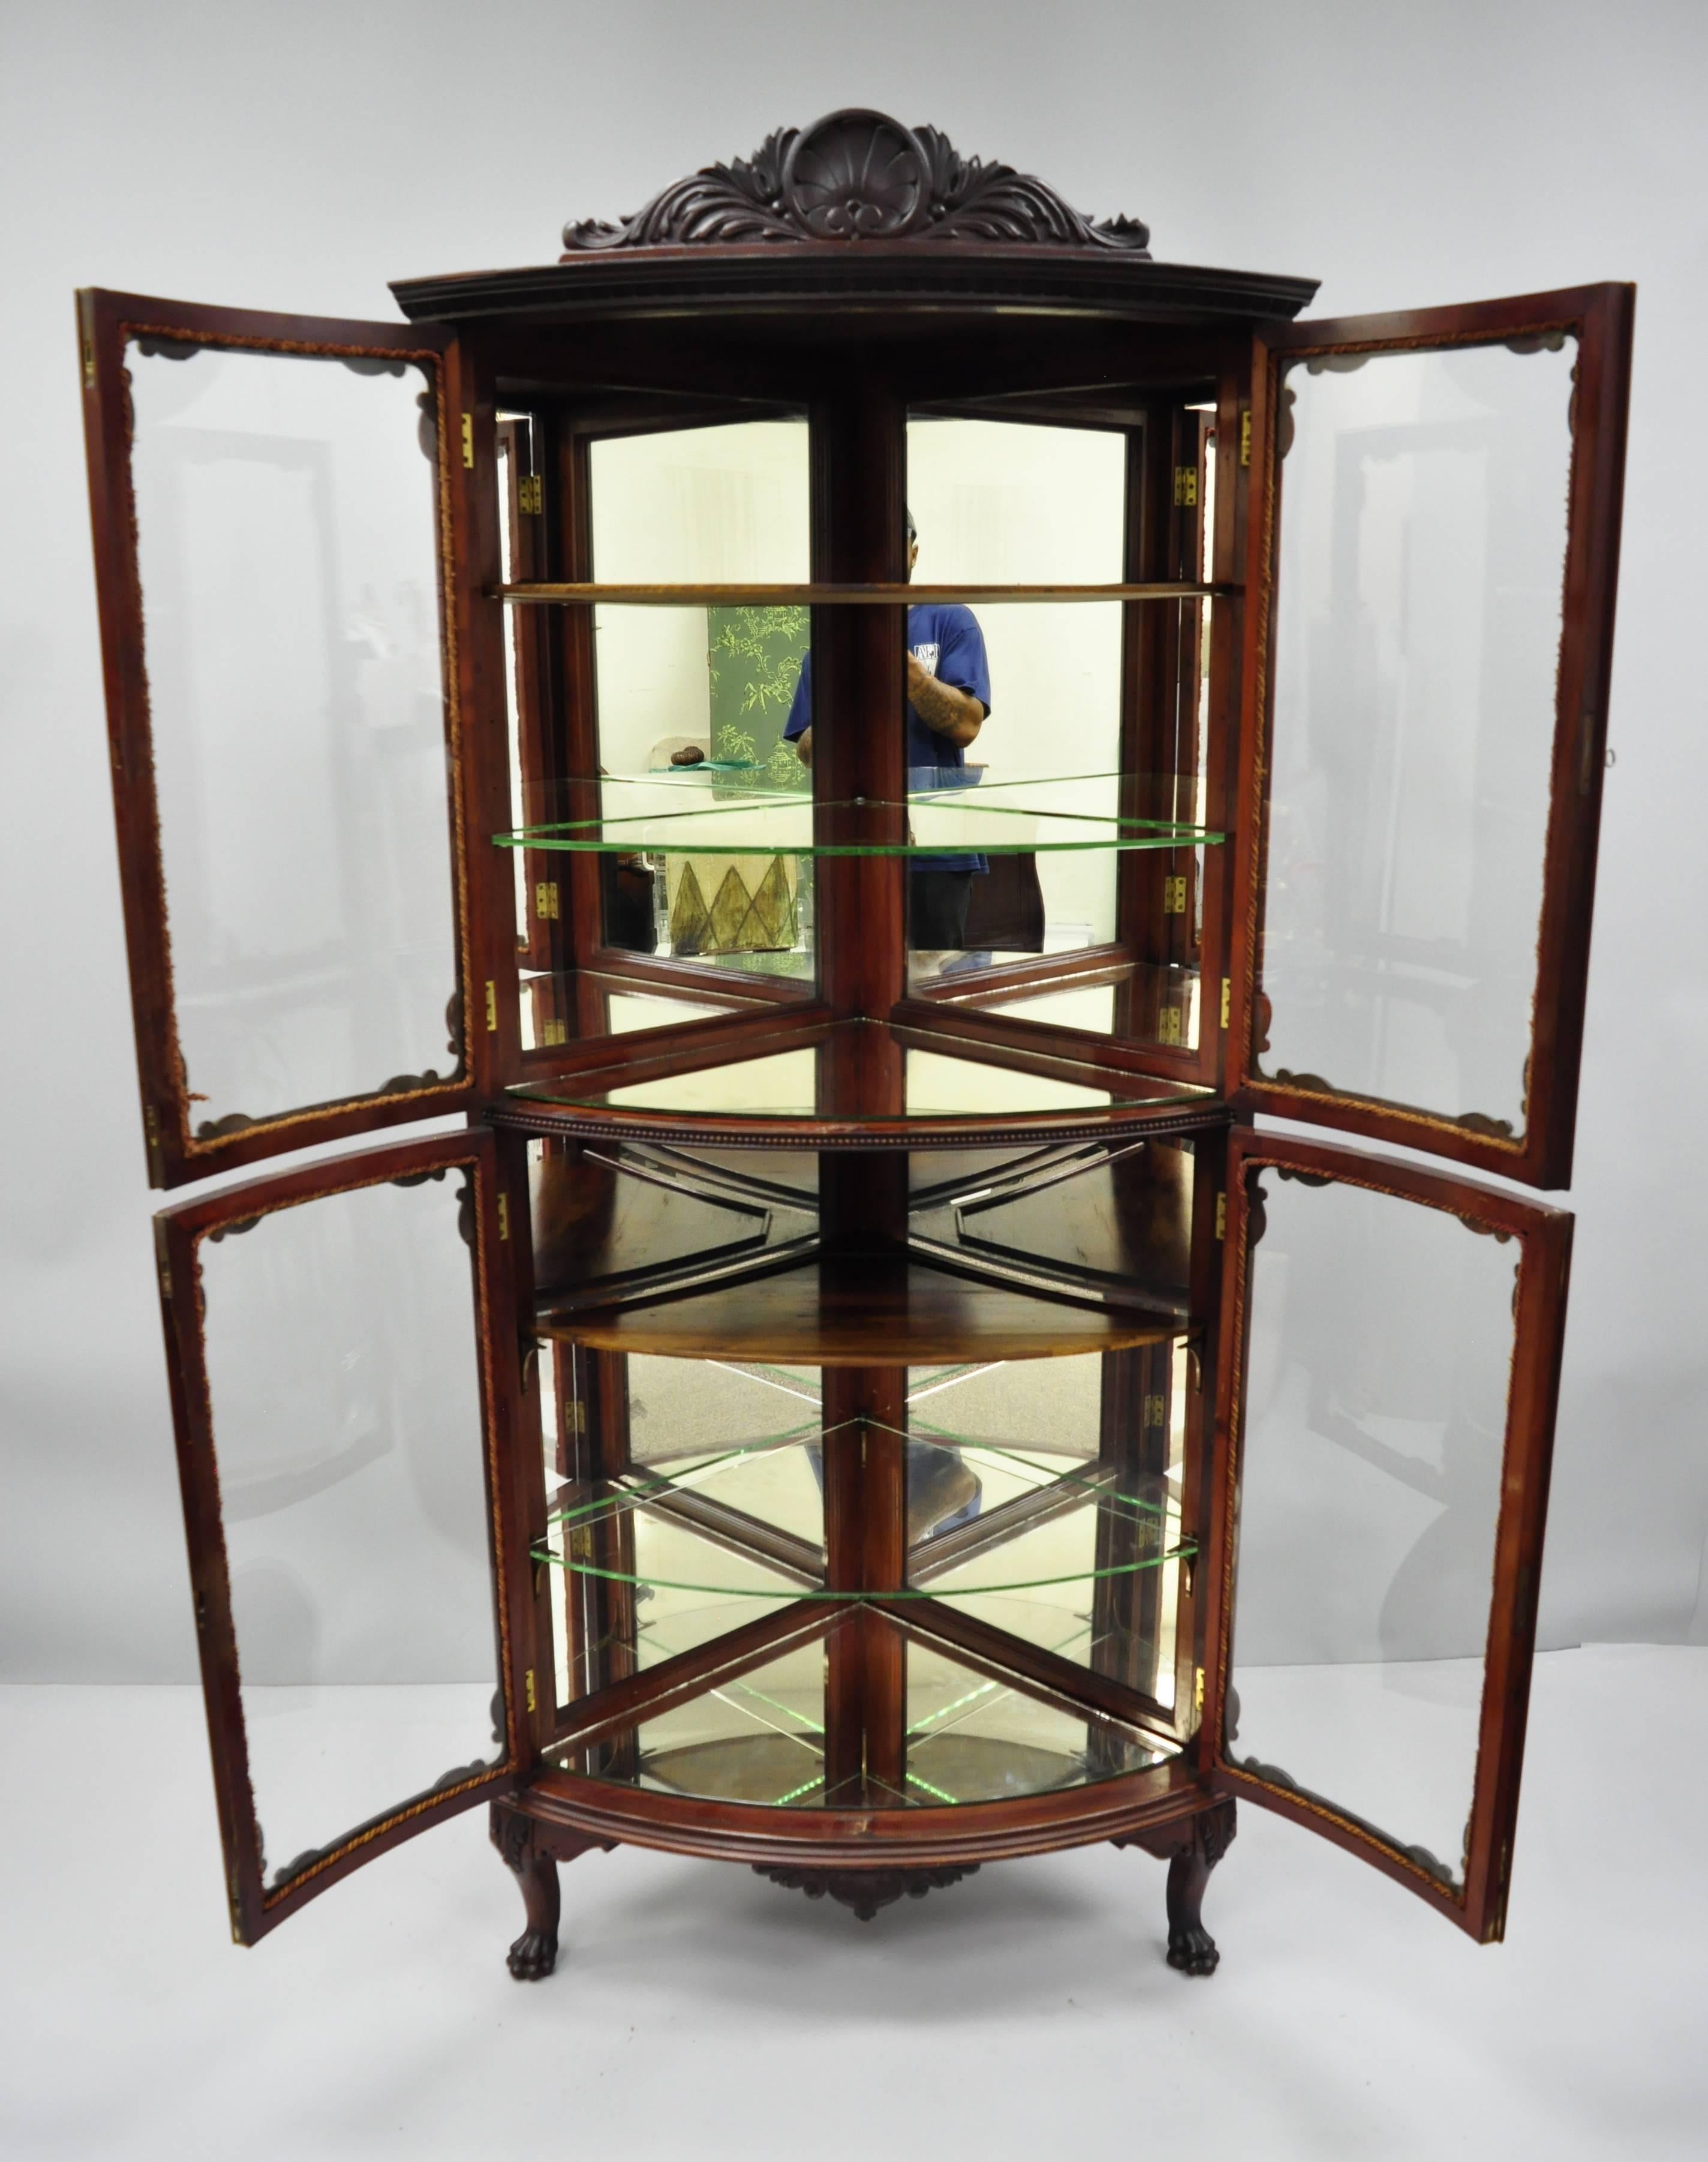 Antique mahogany Victorian bow glass corner curio cabinet. Item feature a shell carved pediment, four bow glass doors, carved paw feet, two wooden shelves, two clear glass shelves, two mirrored shelves, finely carved details, working lock and key,